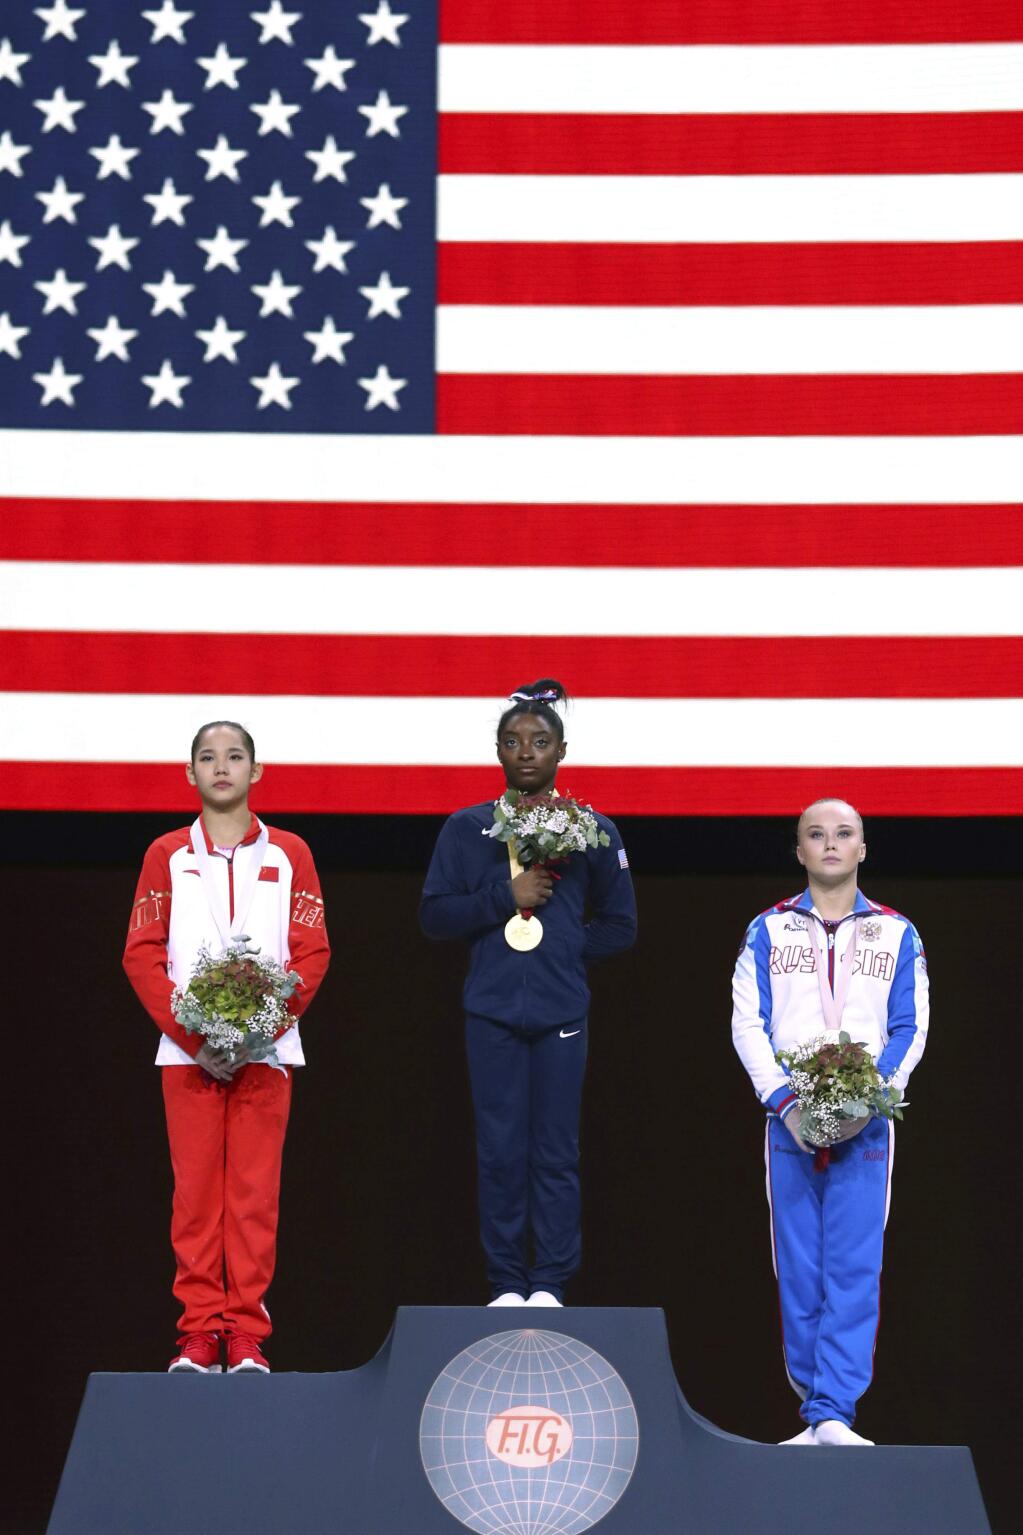 Gold medal winner Simone Biles of the U.S., center, second placed Xijing Tang of China, left, and third placed Angelina Melnikova of Russia celebrate on the podium after the women's all-around final at the Gymnastics World Championships in Stuttgart, Germany, Thursday, Oct. 10, 2019. (AP Photo/Matthias Schrader)